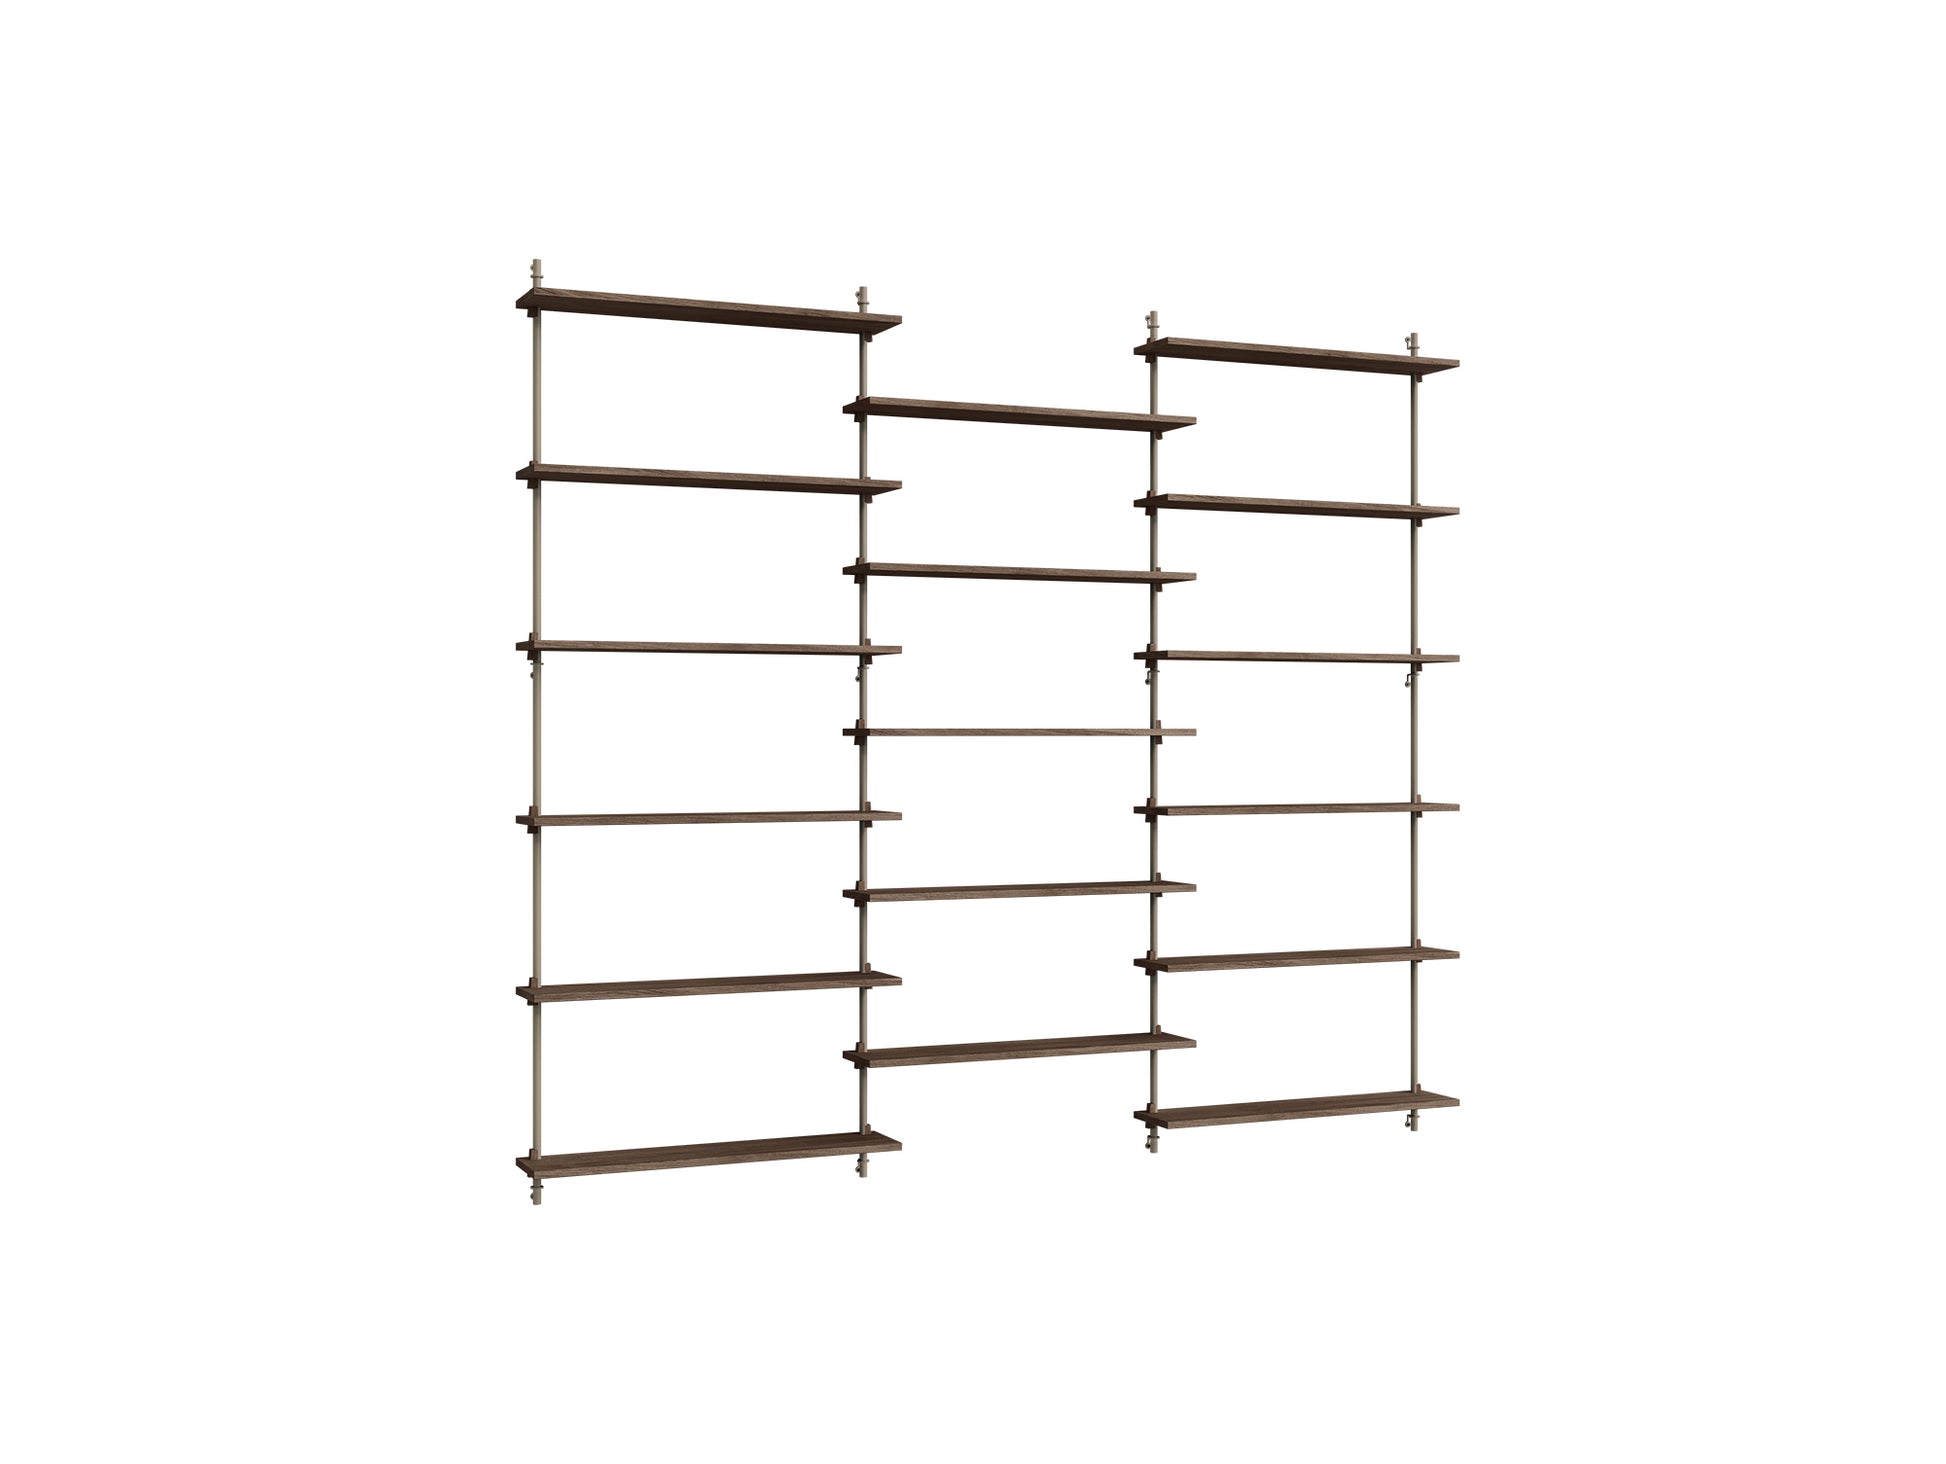 Wall Shelving System Sets (200 cm) by Moebe - WS.200.3 / Warm Grey Uprights / Smoked Oak